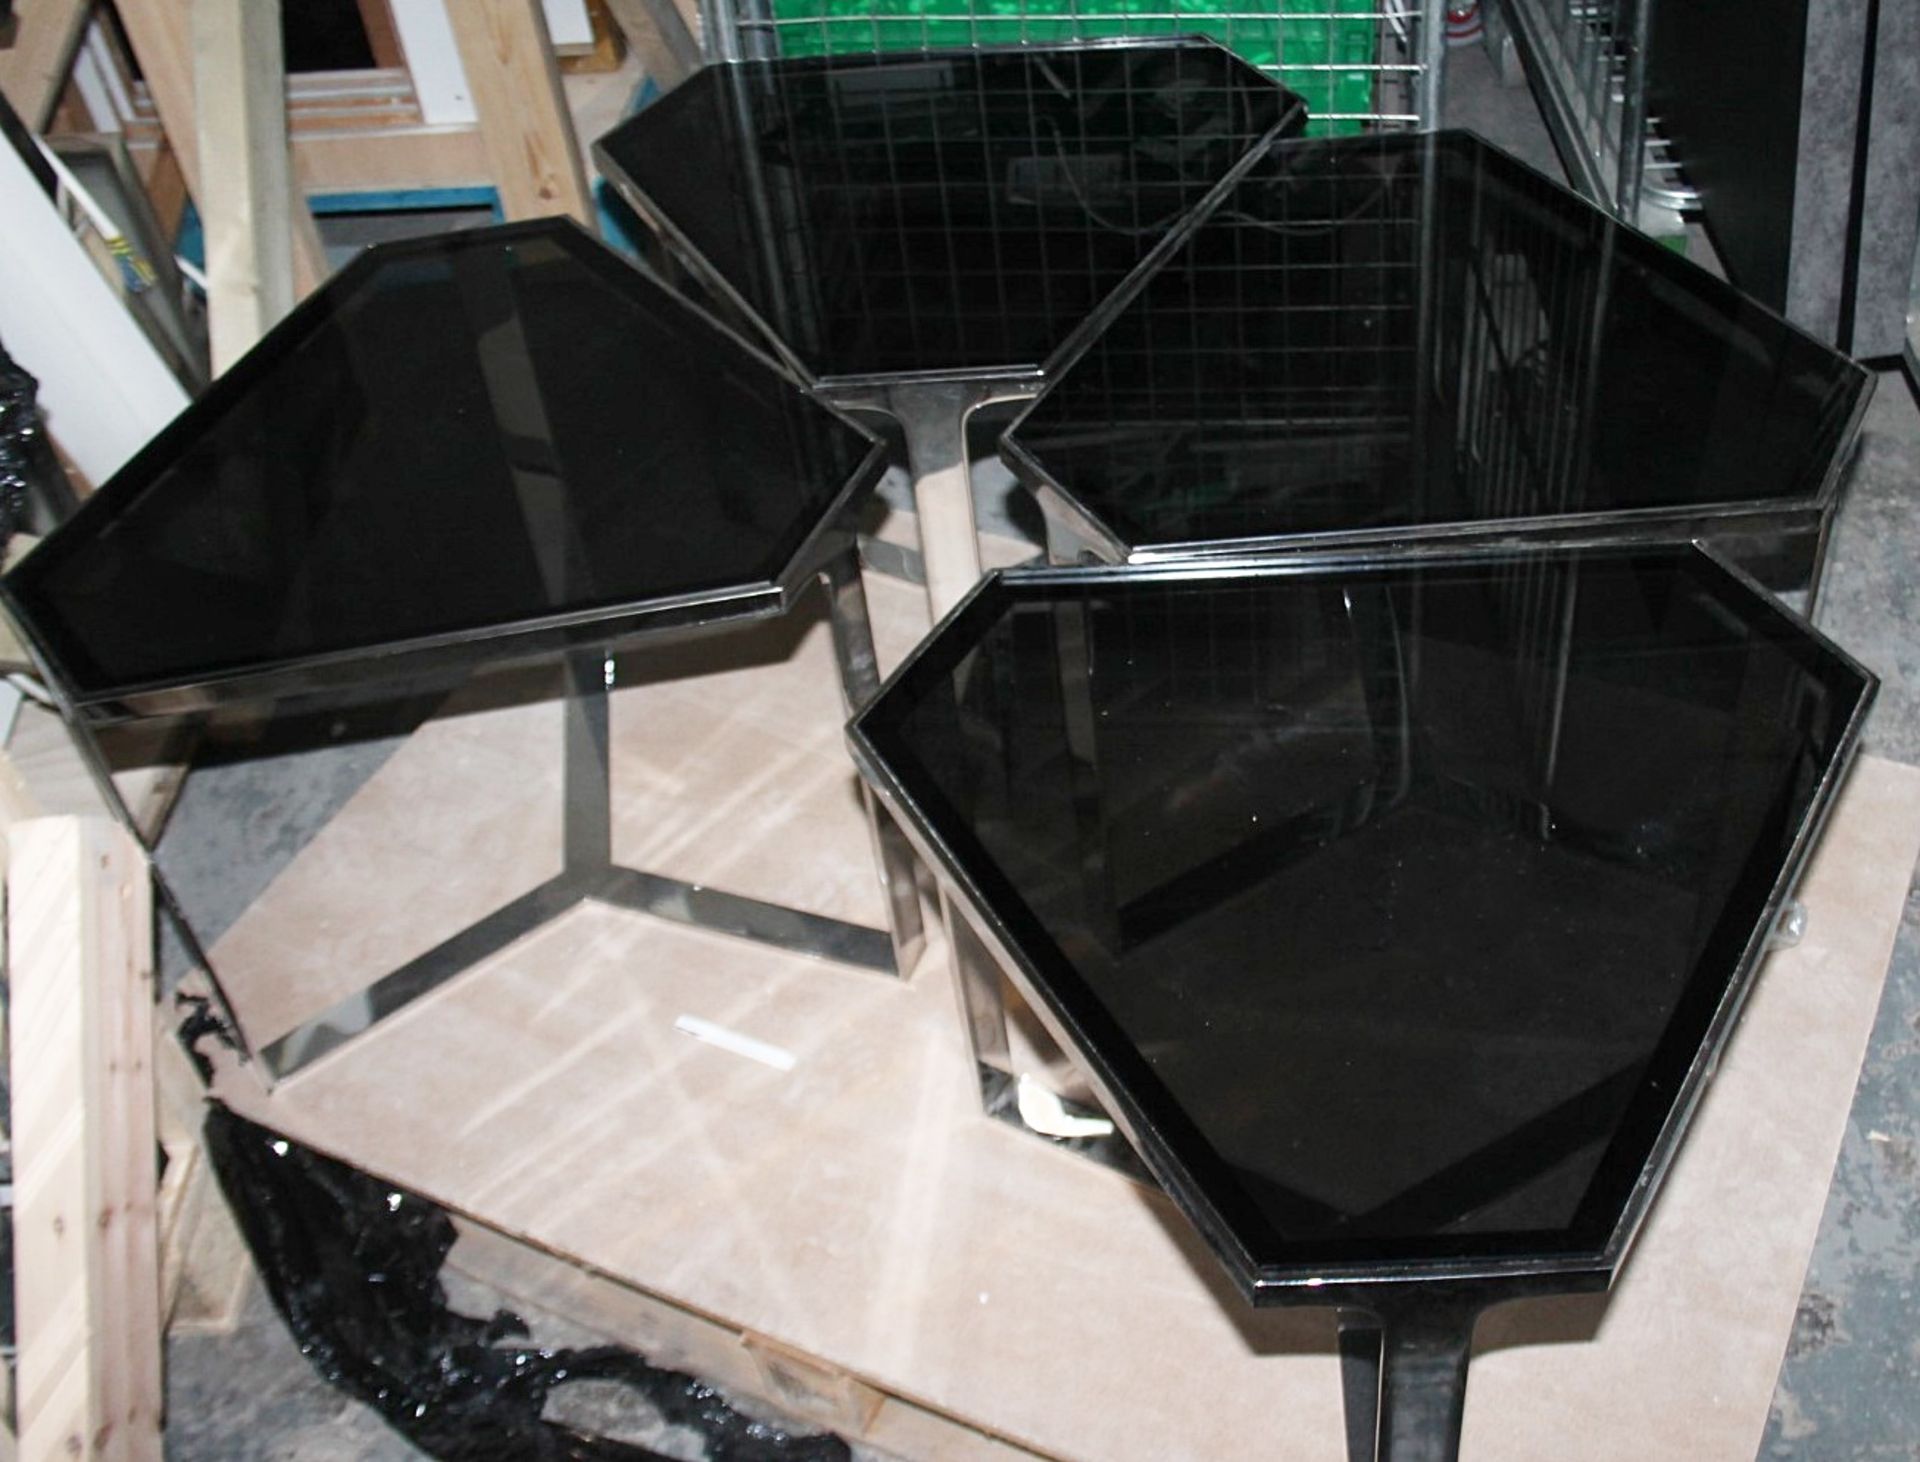 1 x Designer 5-Section Geometric Coffee Table, With Tinted Glass Tops and Chromed Bases - Image 5 of 6